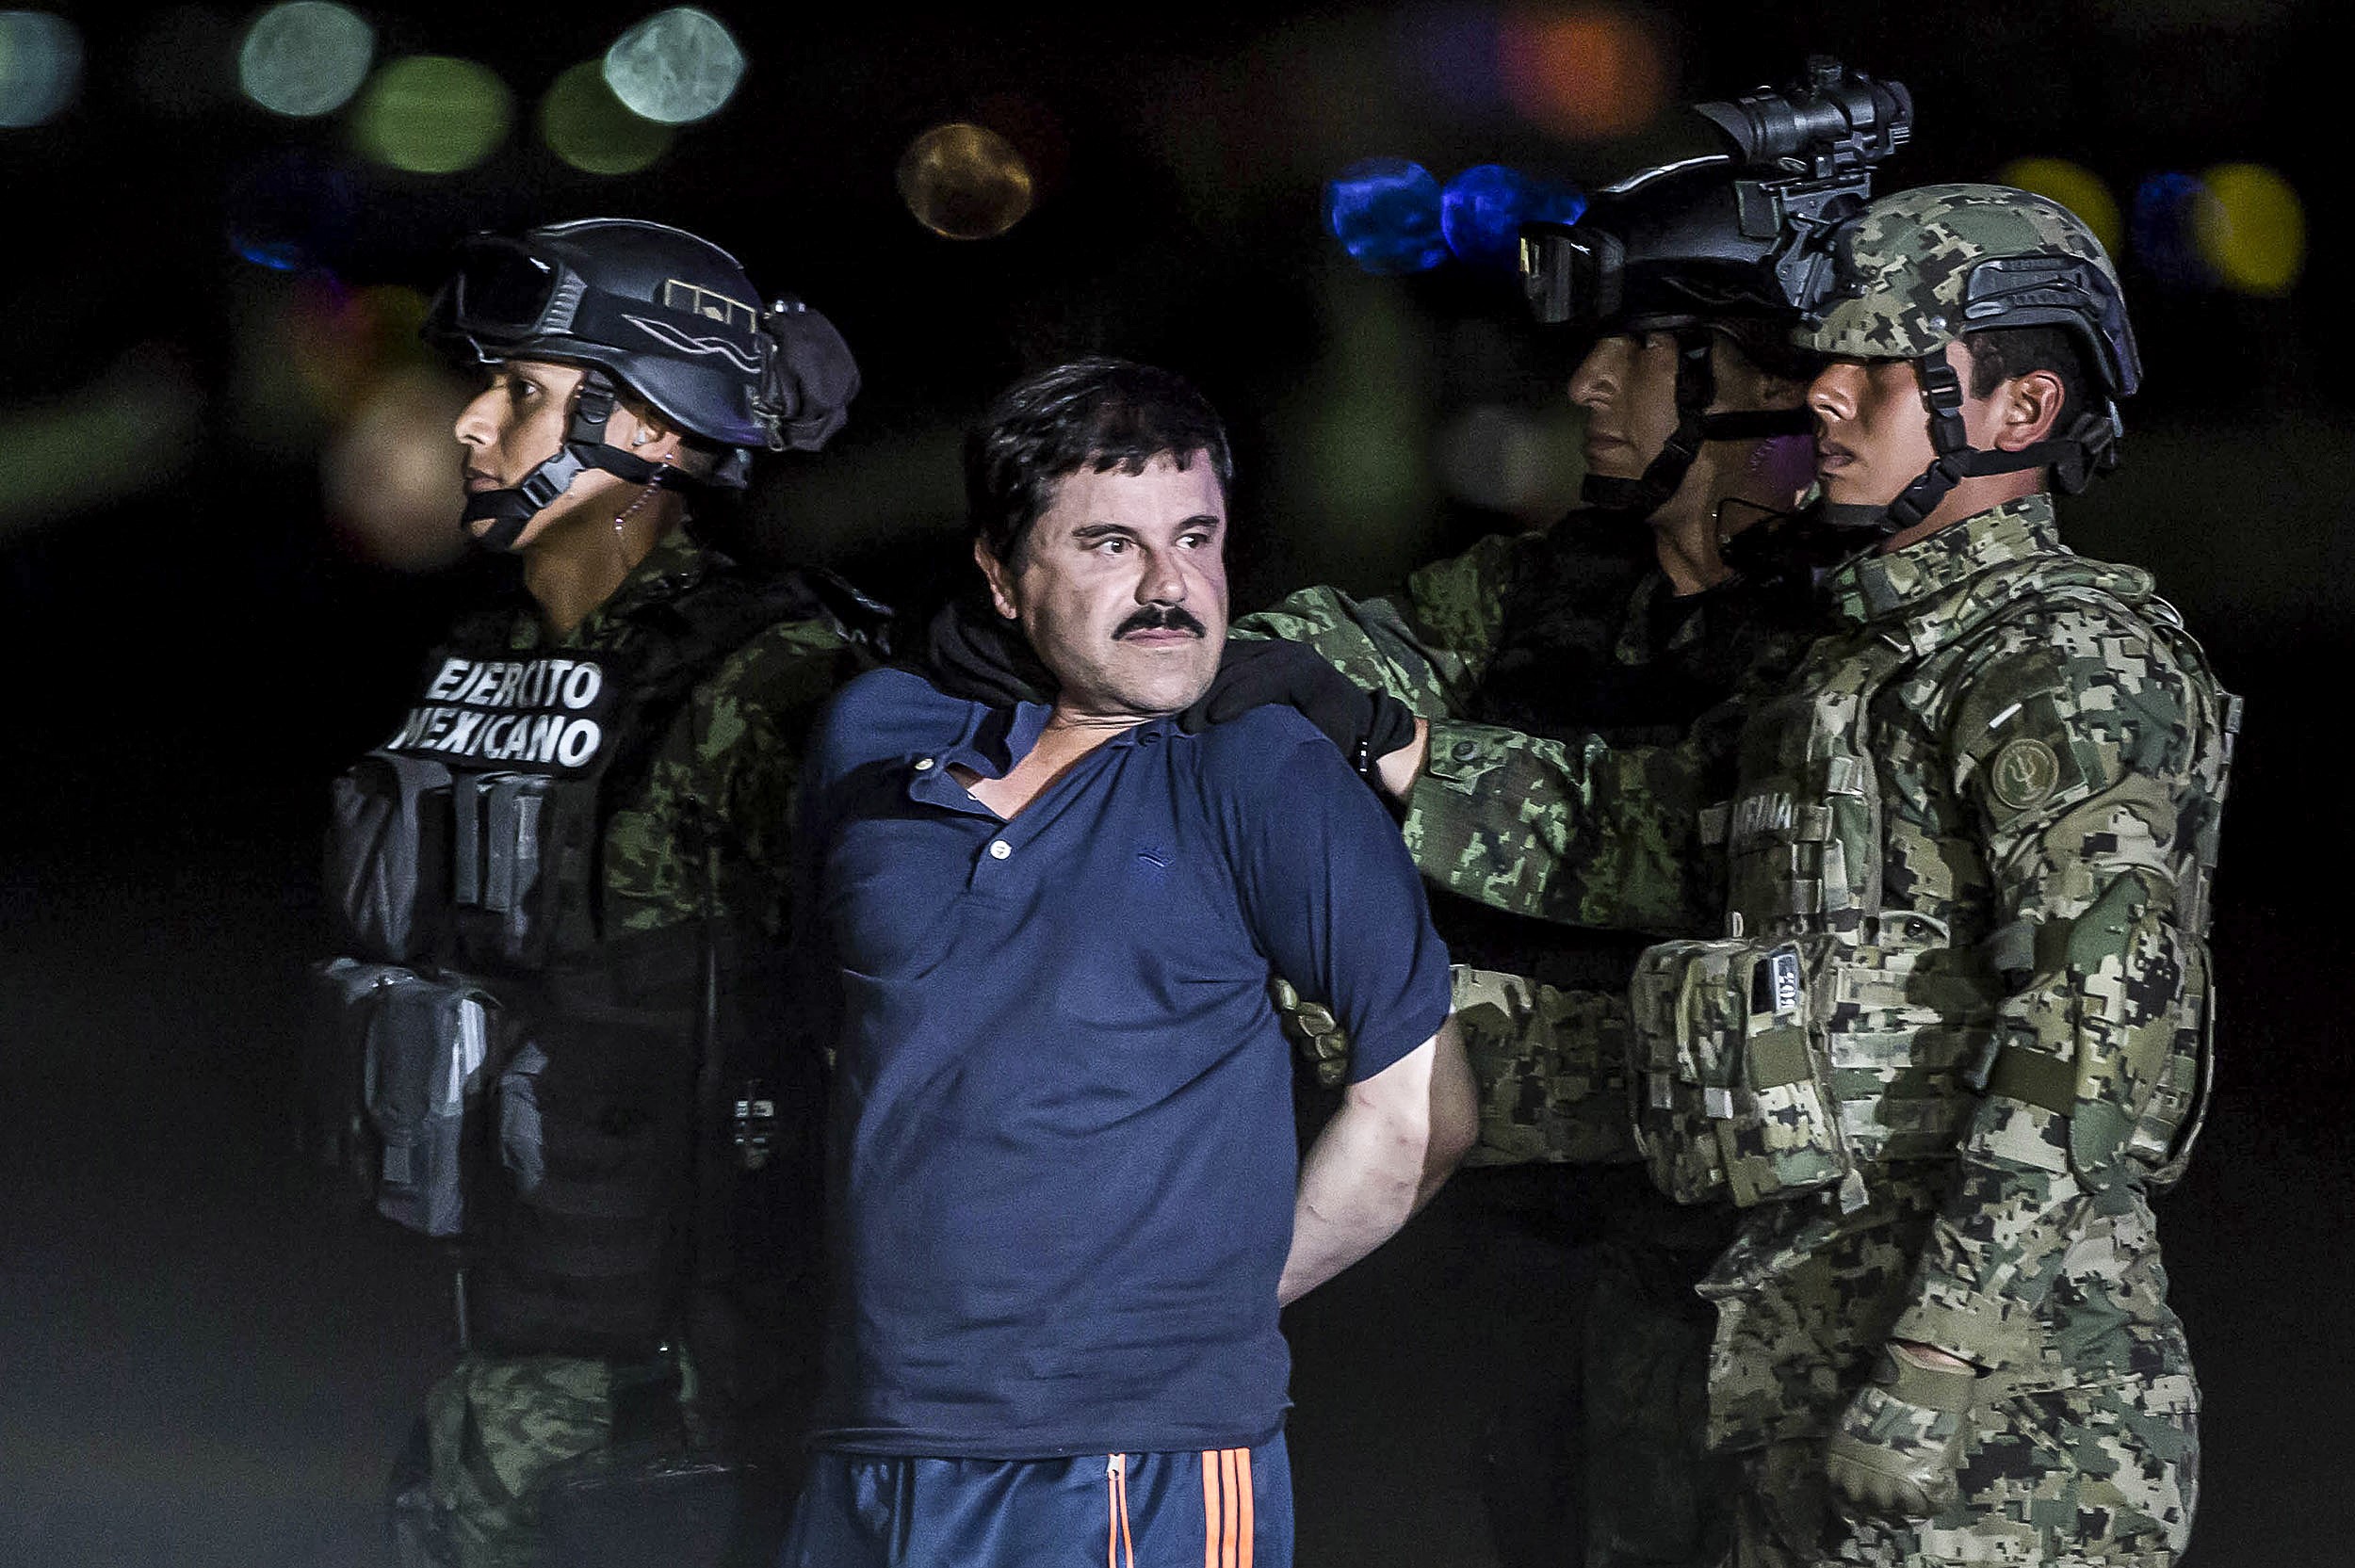 El Chapo is transported to maximum security prison in Mexico City on Jan. 8, 2016. (Daniel Cardenas—Anadolu Agency/Getty Images)